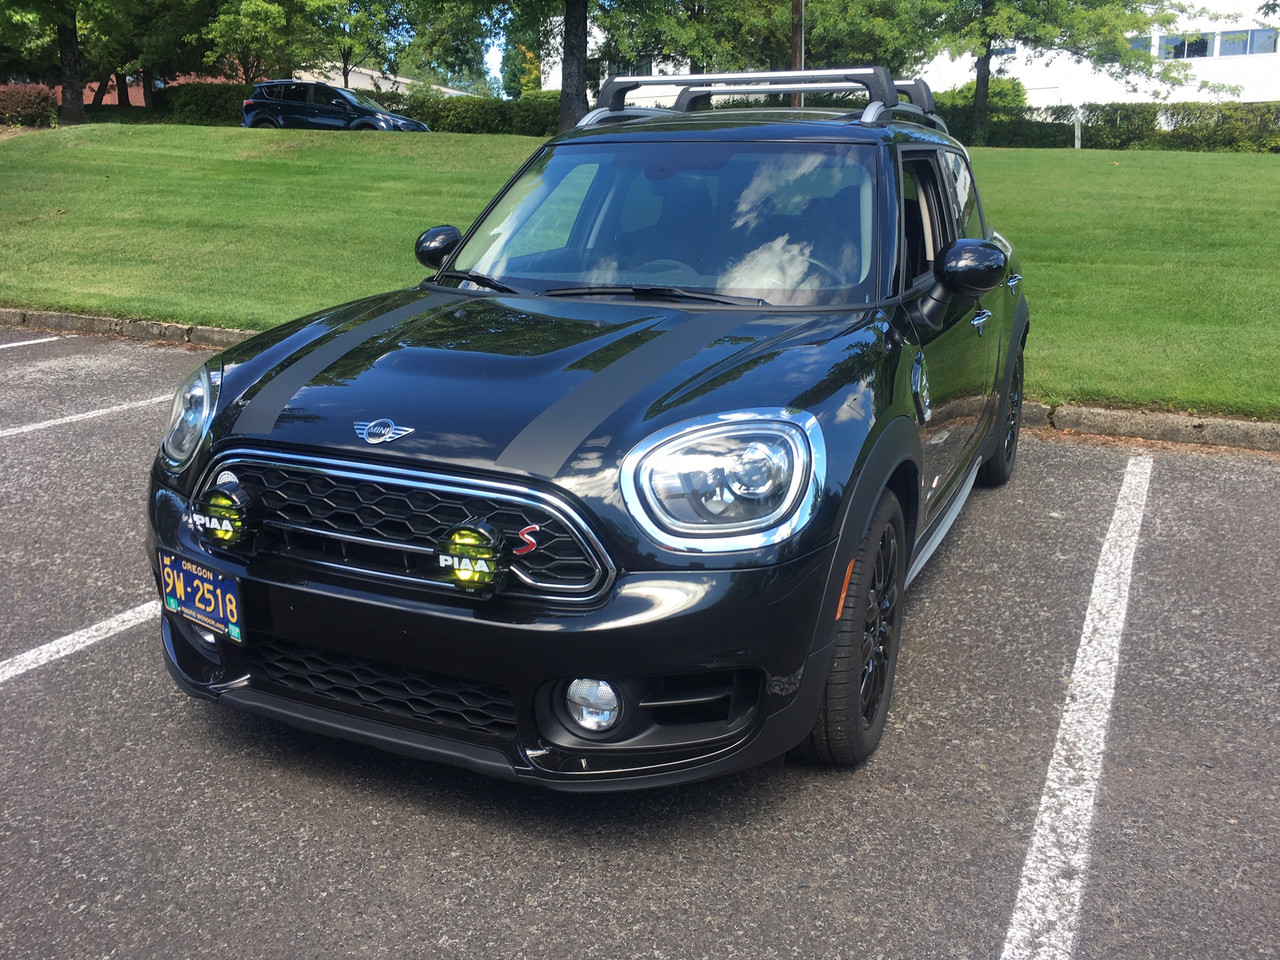 https://cdn11.bigcommerce.com/s-351ed/images/stencil/{:size}/products/20691/184575/blackout_beltline_trim_decal_kit_for_mini_countryman_f60_2017_to_2023_matte_black_FOKT31H_20691__07879.1701313169.png?c=2